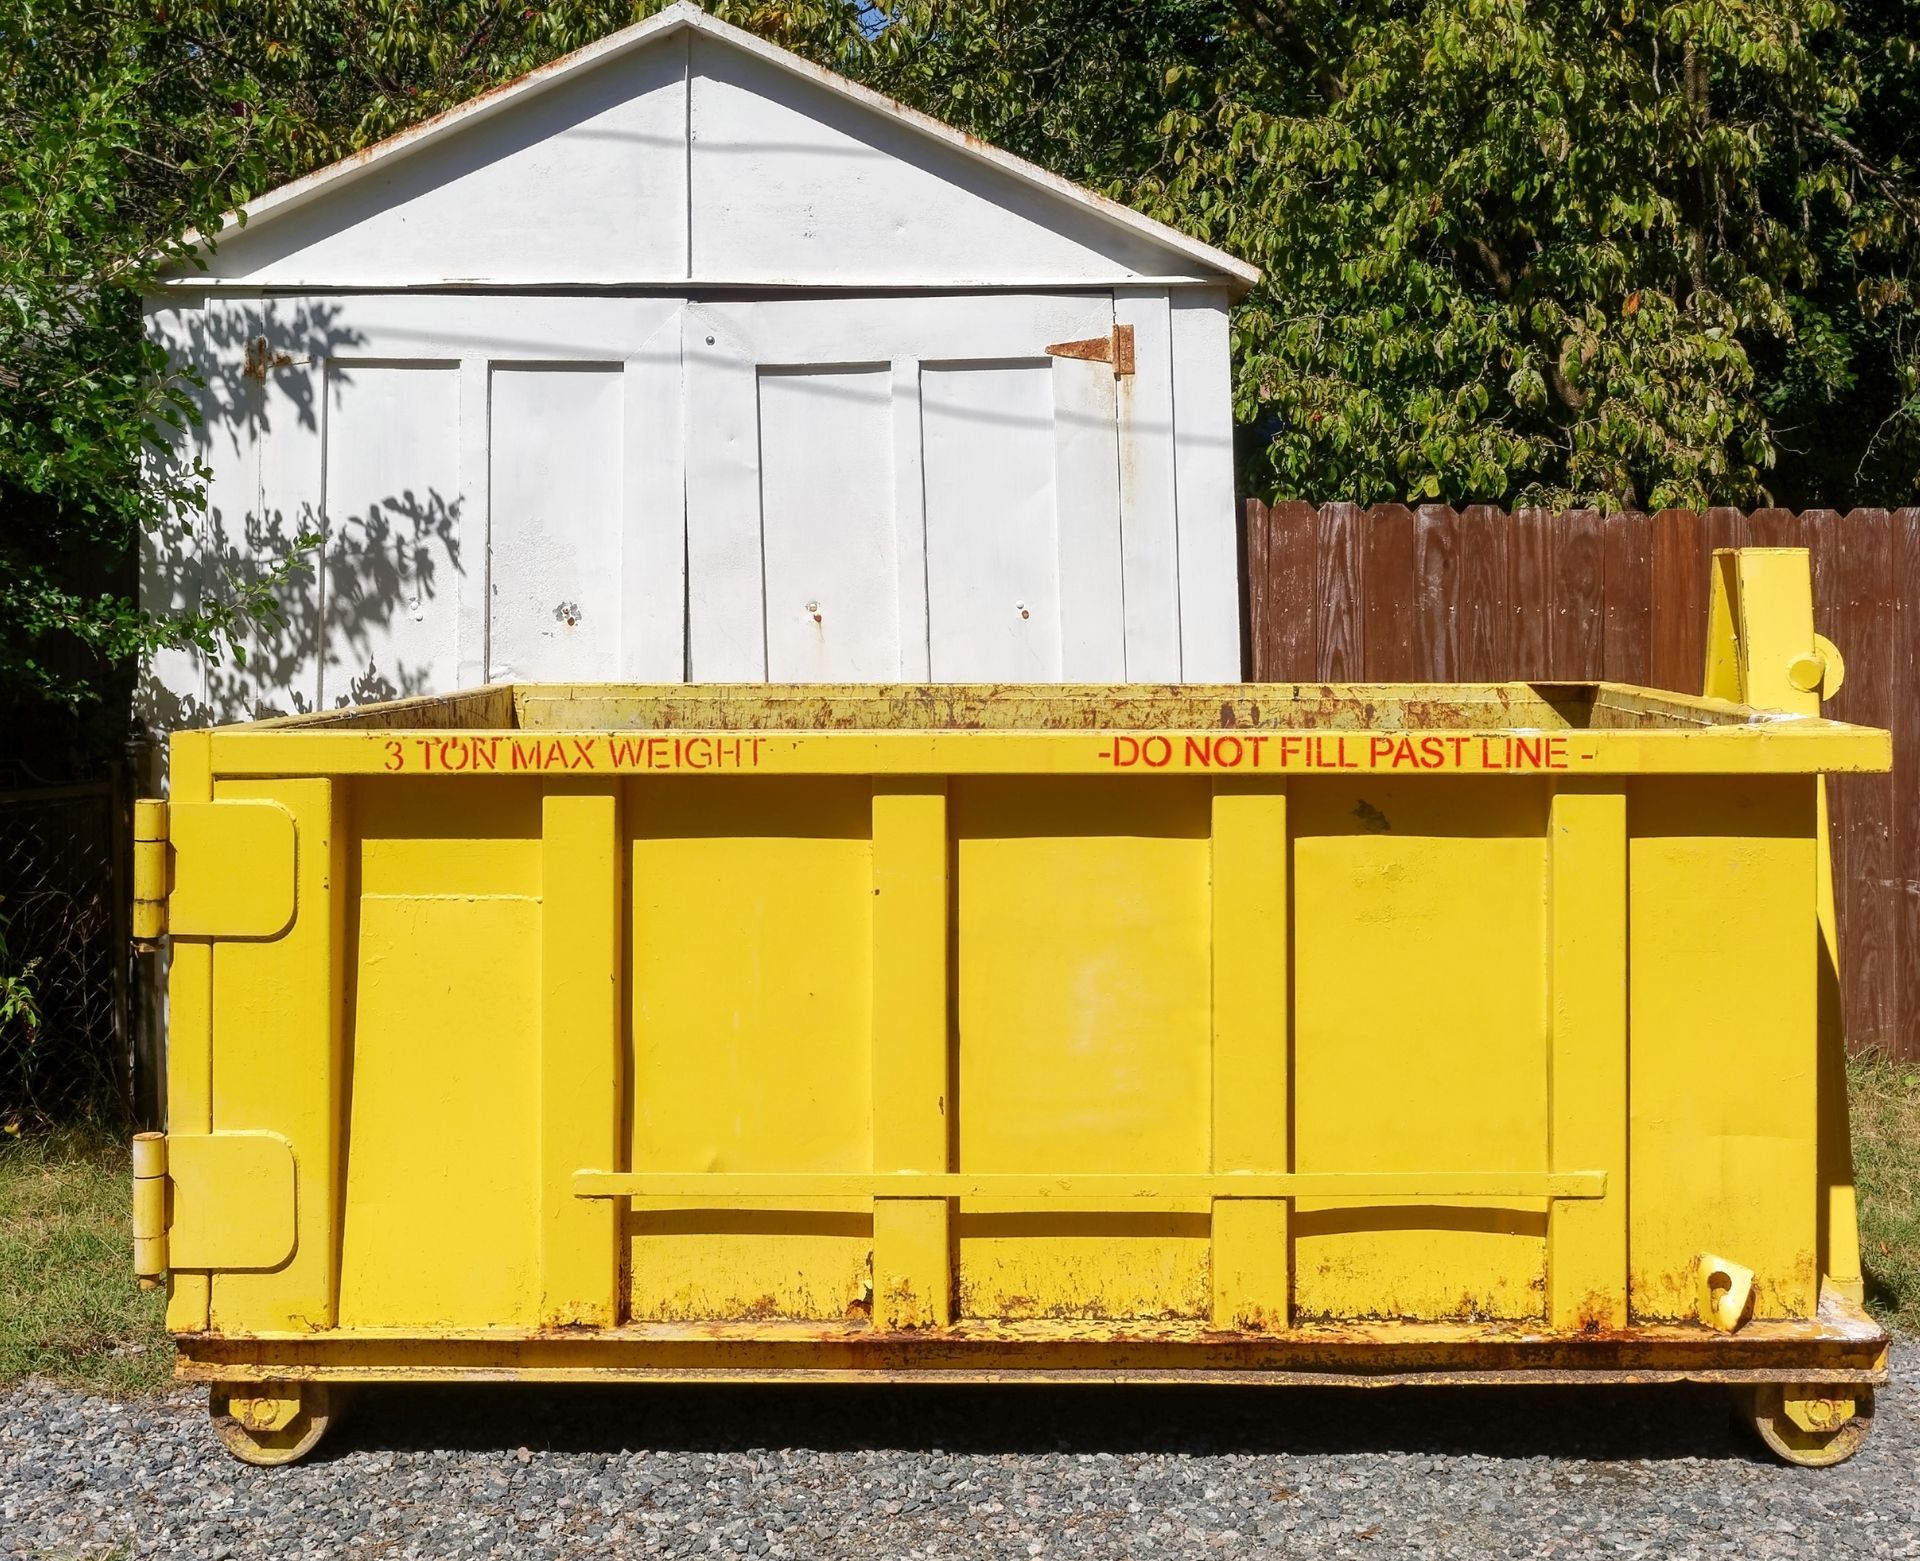 How to rent a dumpster